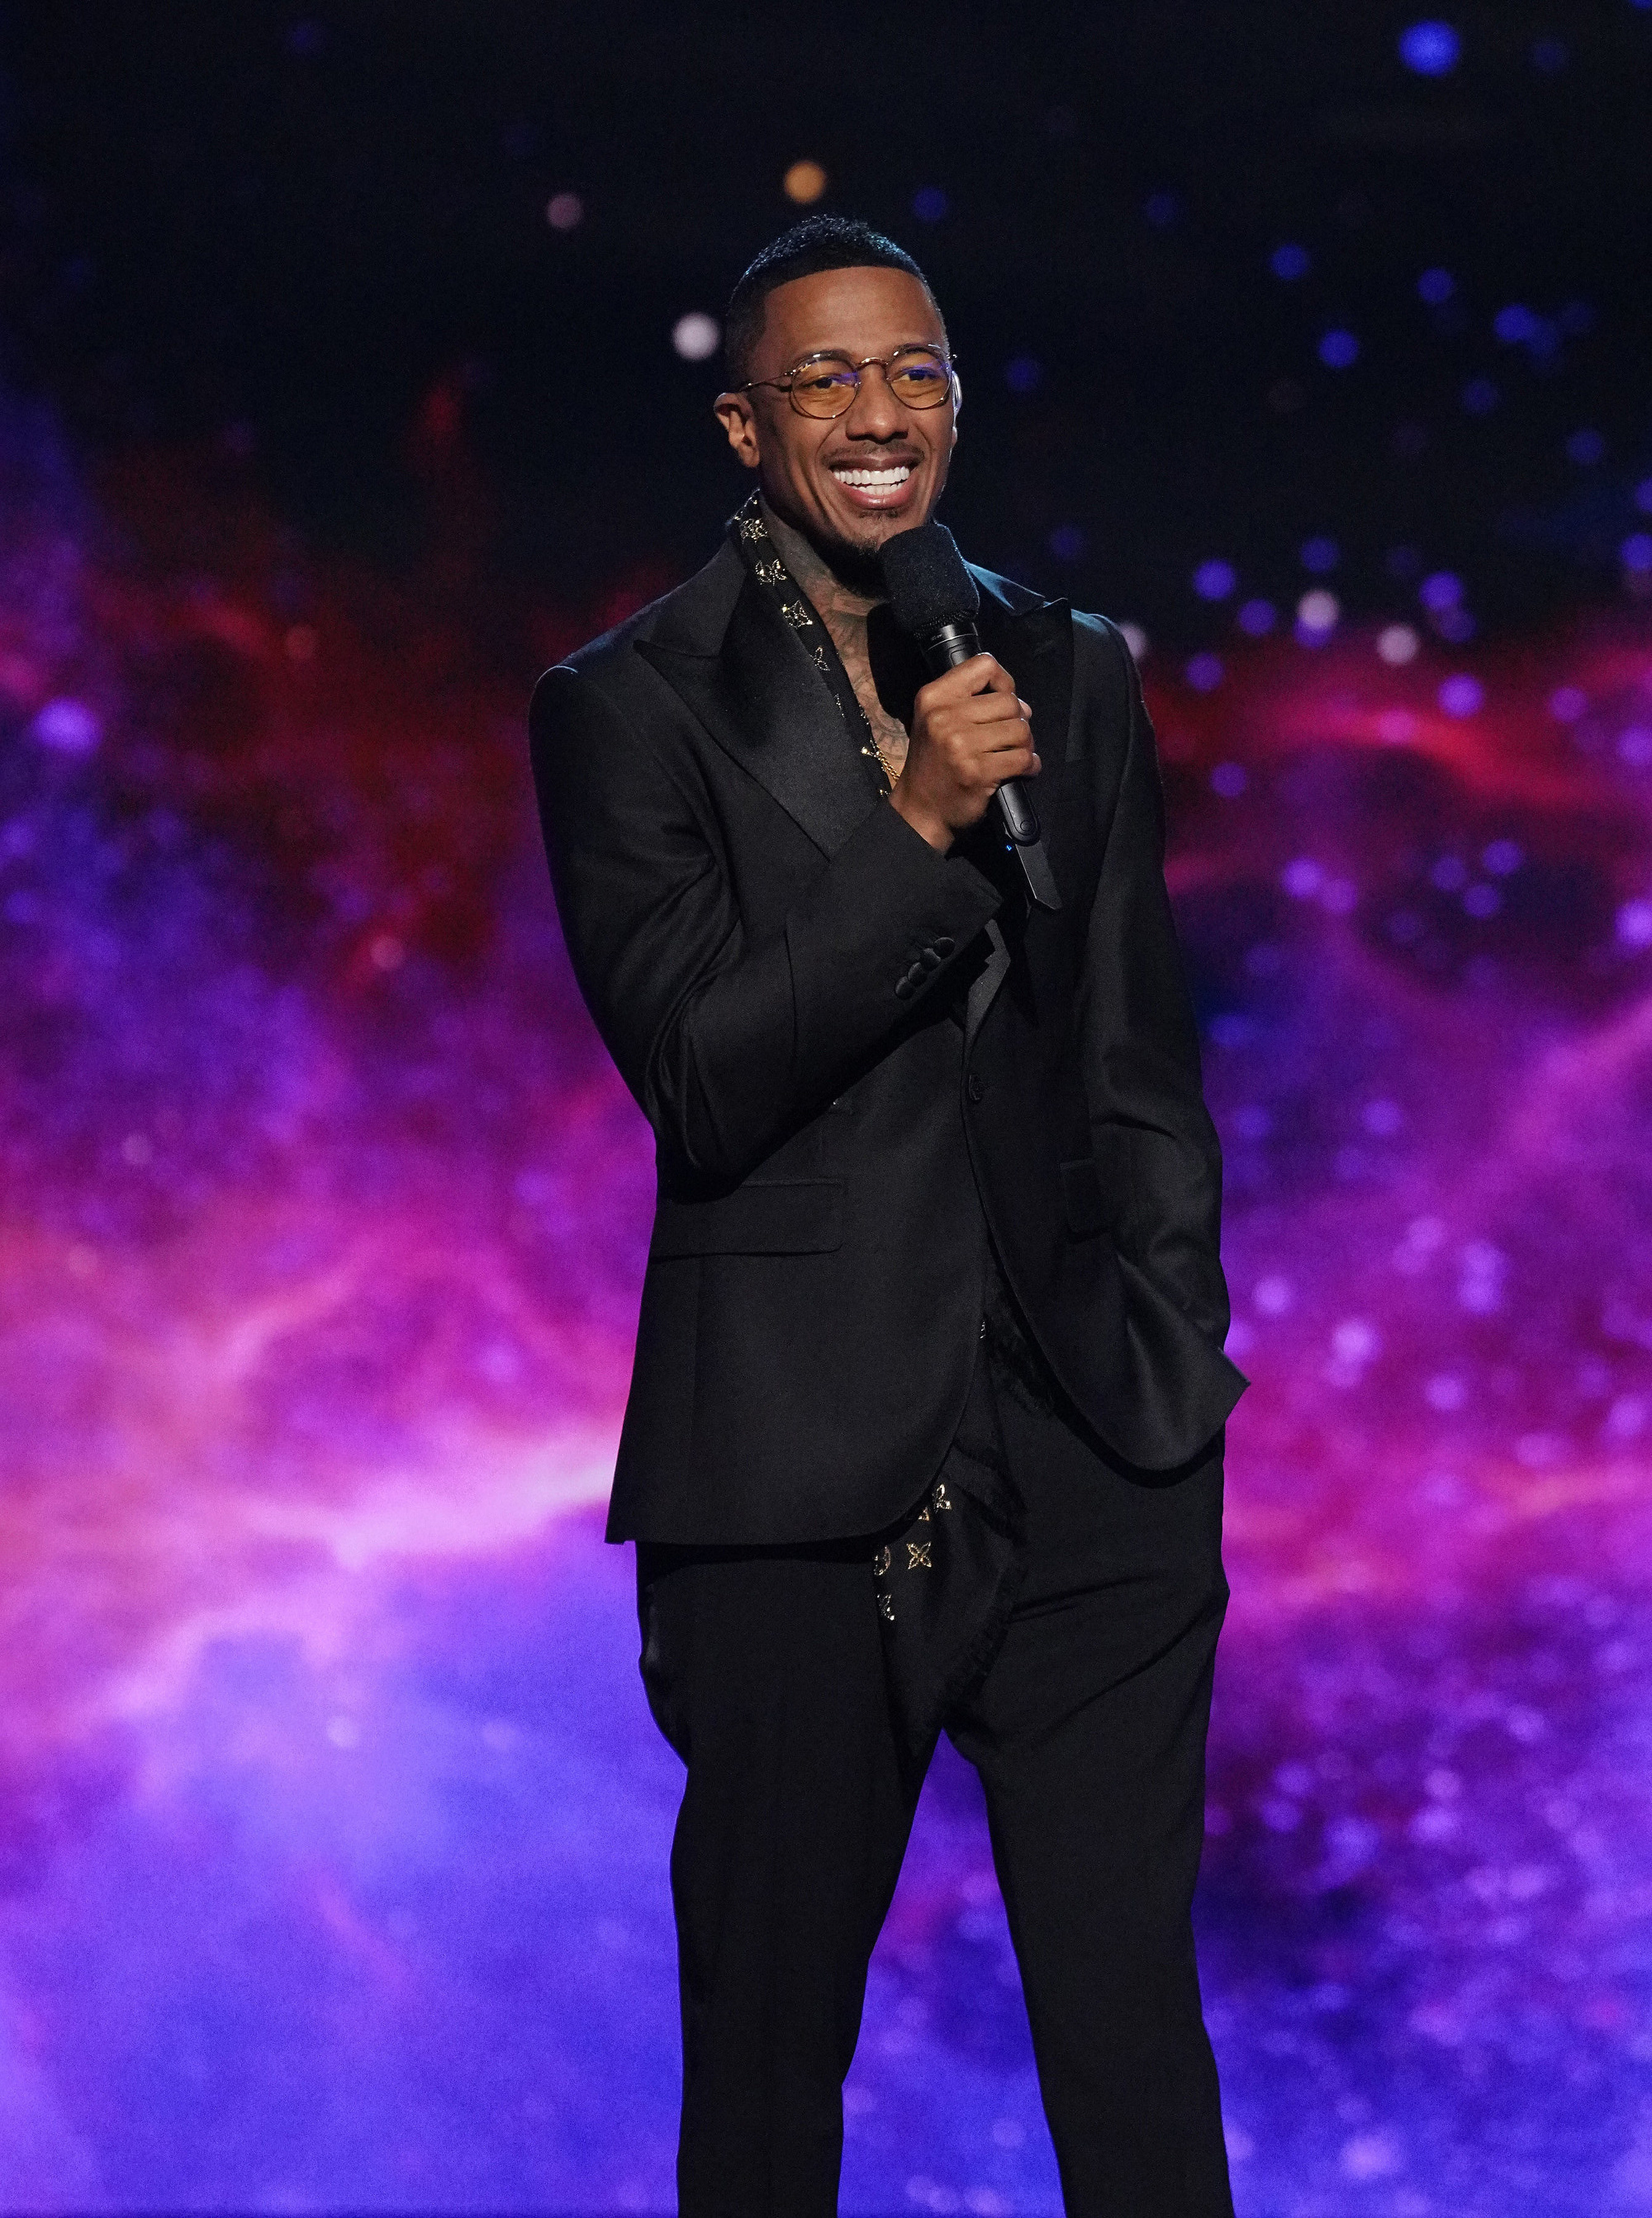 Nick Cannon smiling and holding a mic onstage